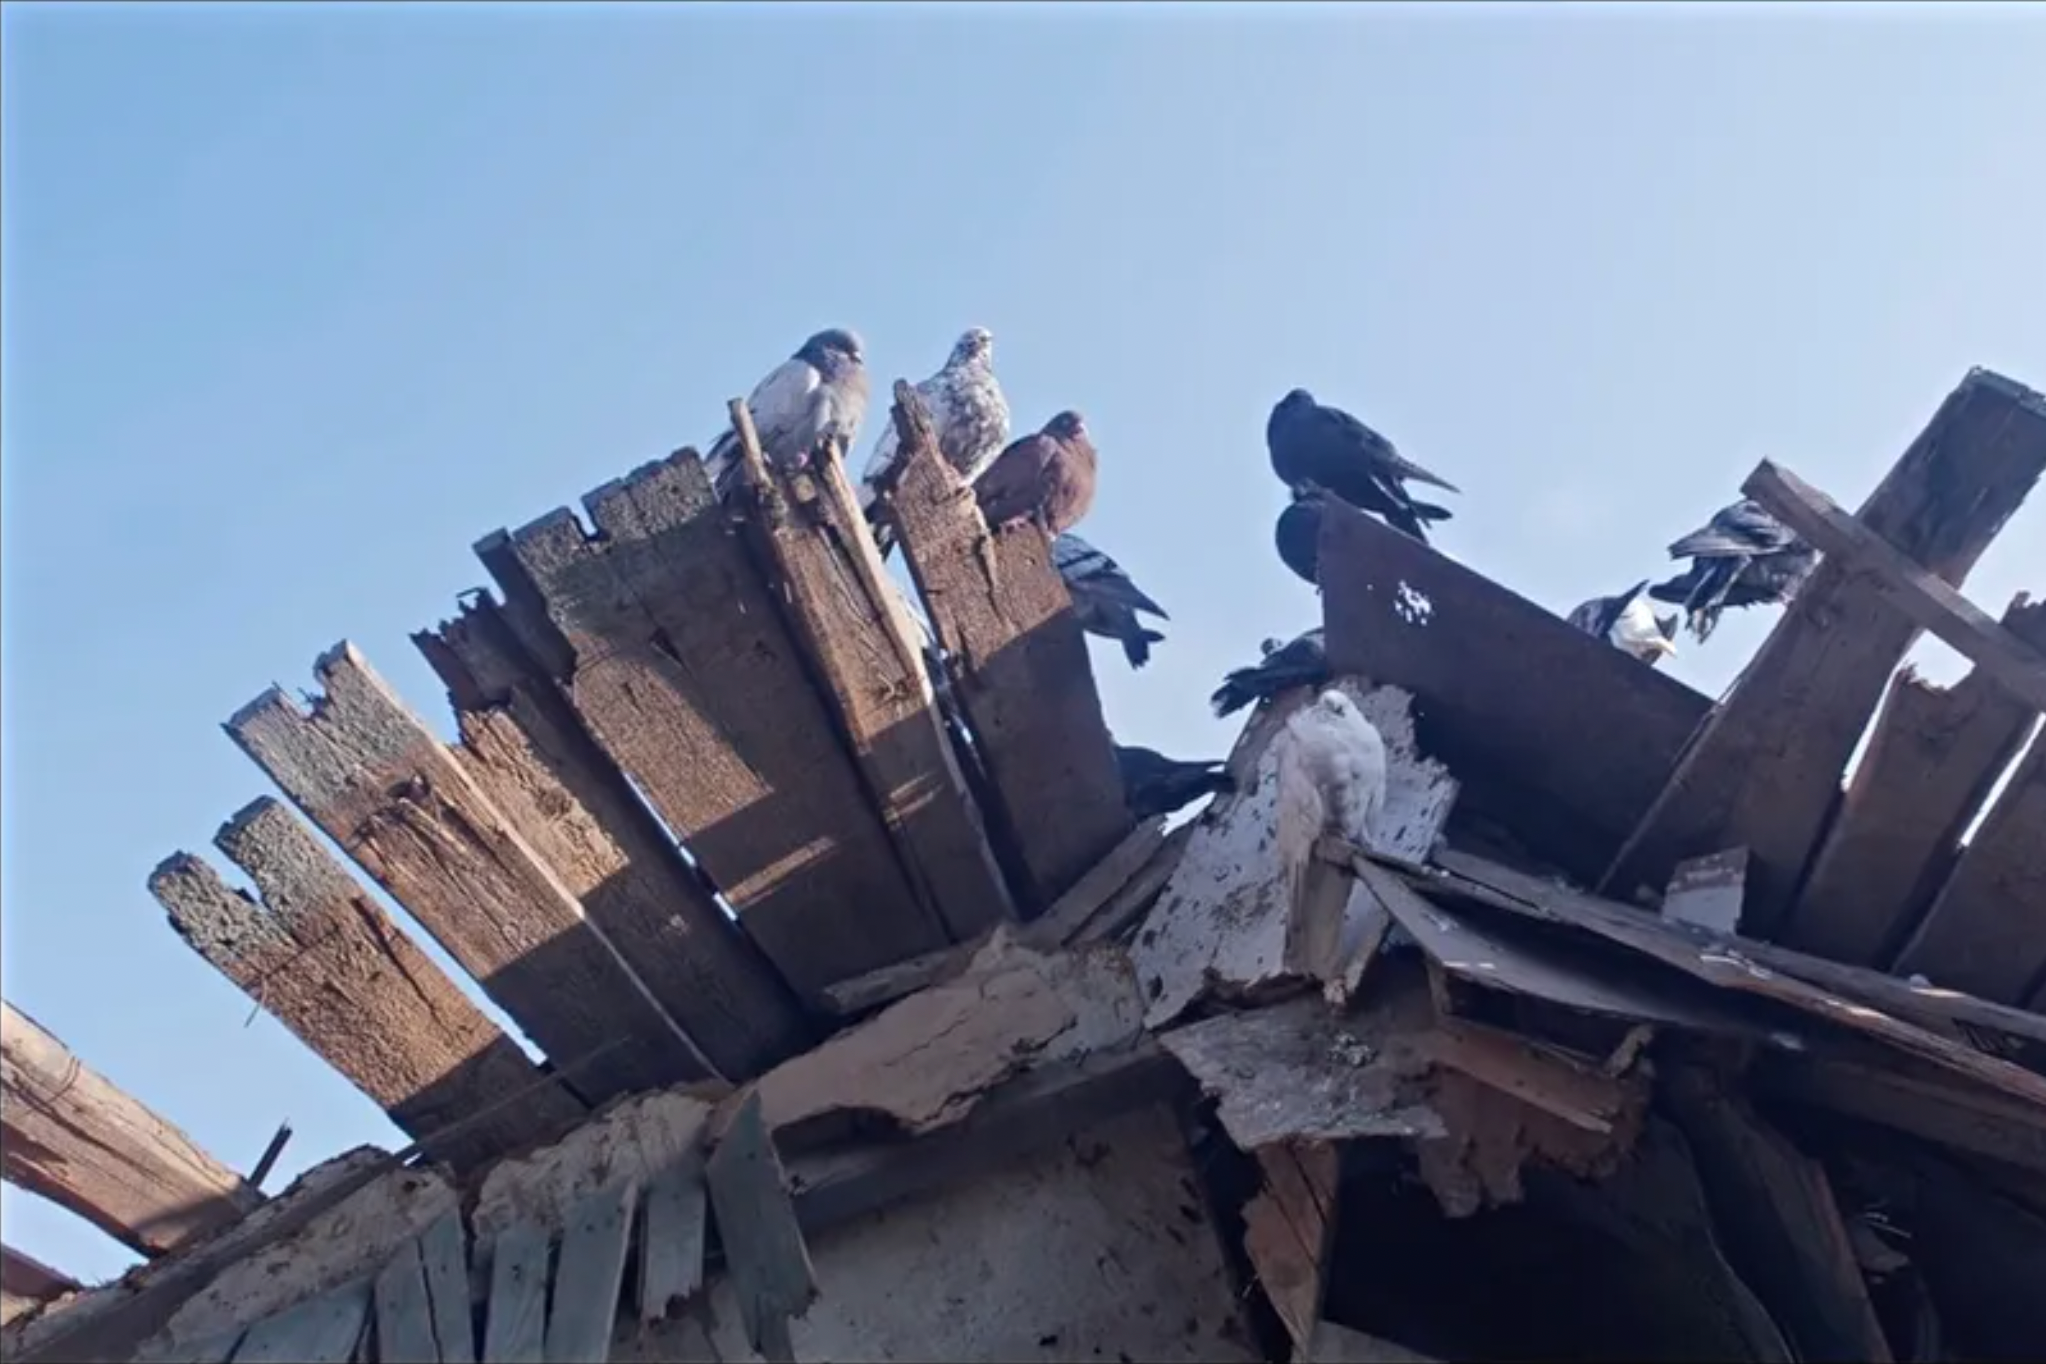 Some pigeons perch atop the ruins of a building